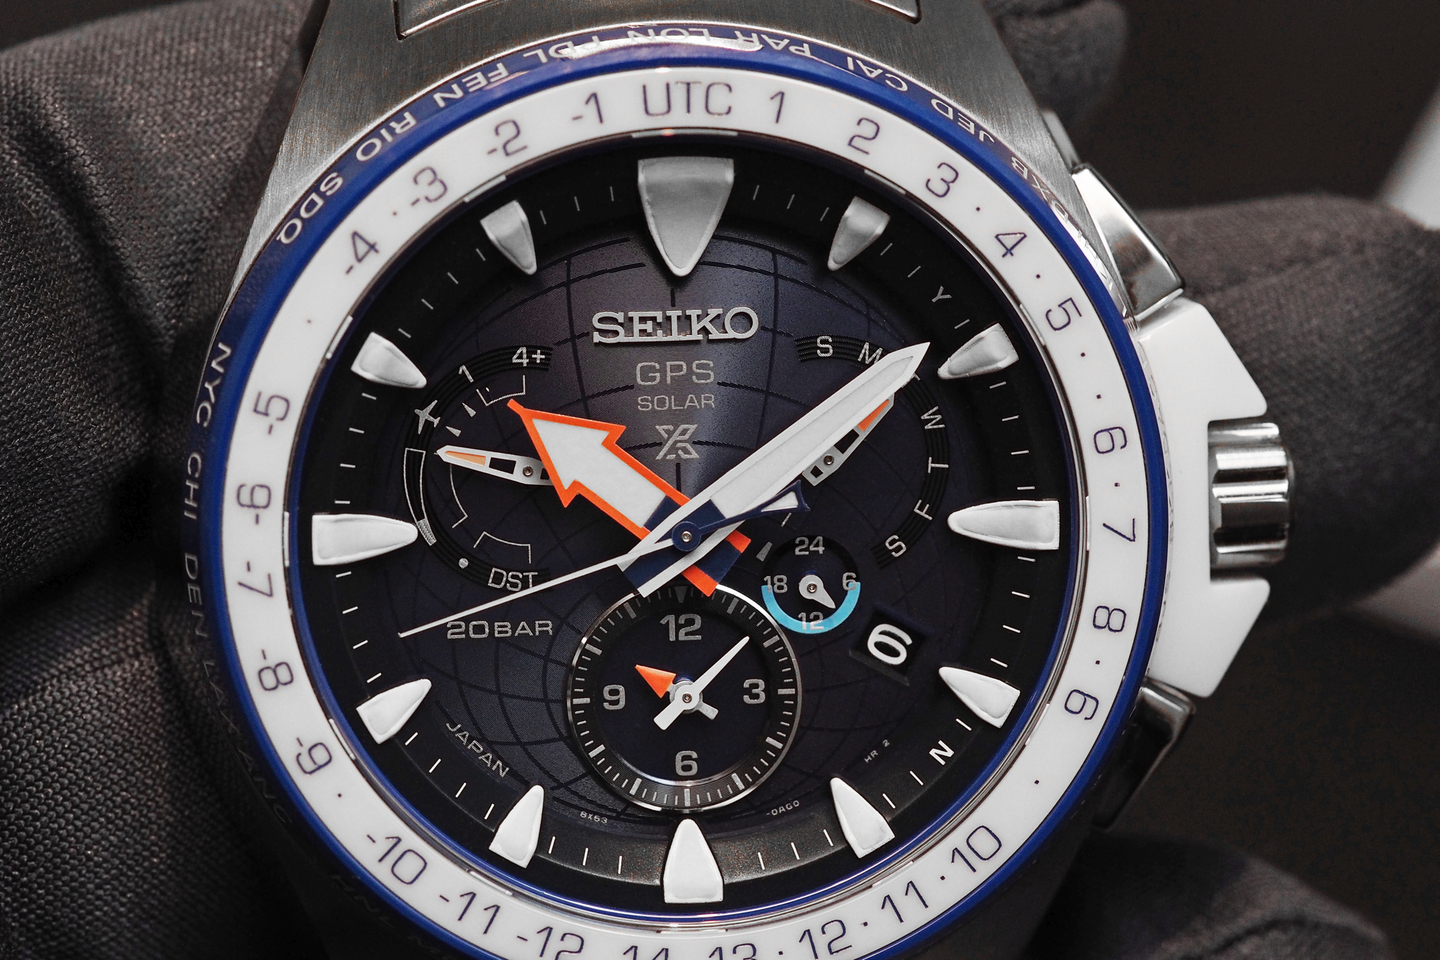 Hands-On Watch Hands-on : Seiko Prospex Marinemaster GPS Solar Dual-Time